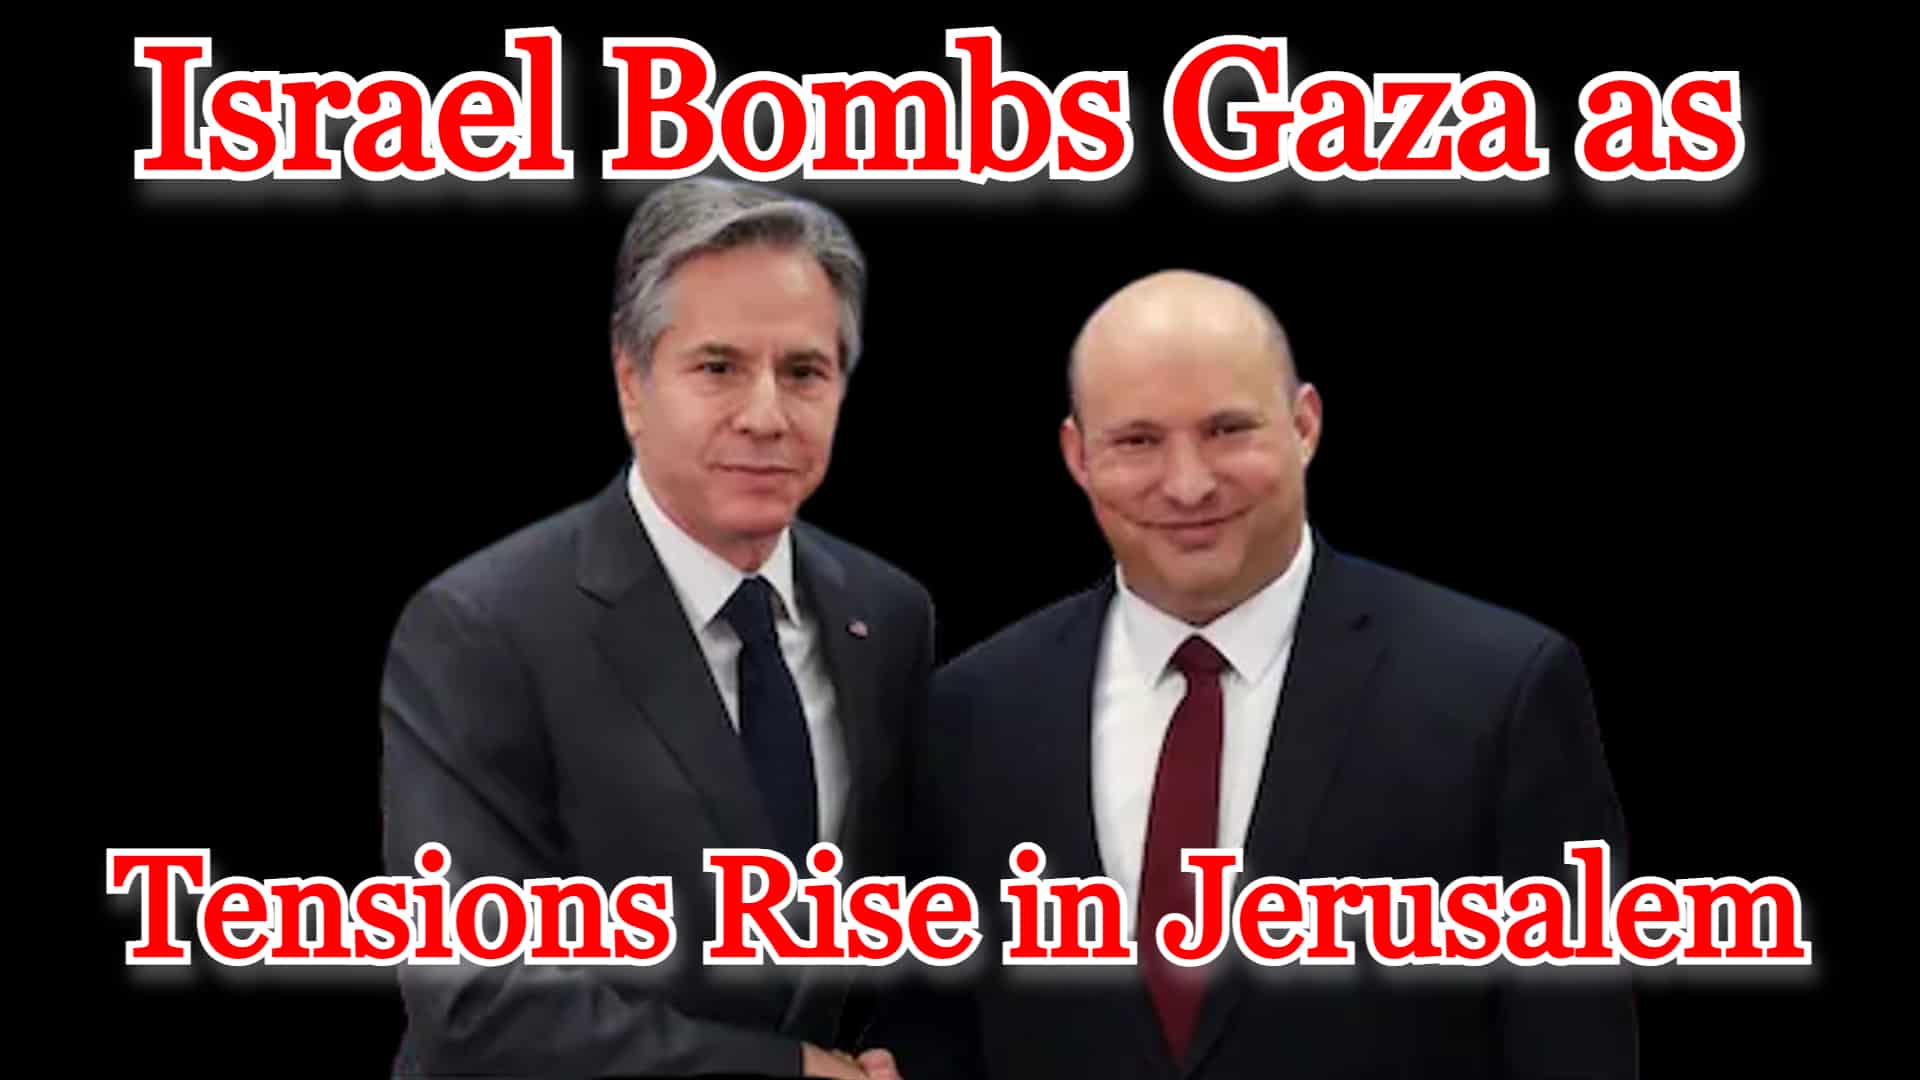 COI #265: Israel Bombs Gaza as Tensions Rise in Jerusalem